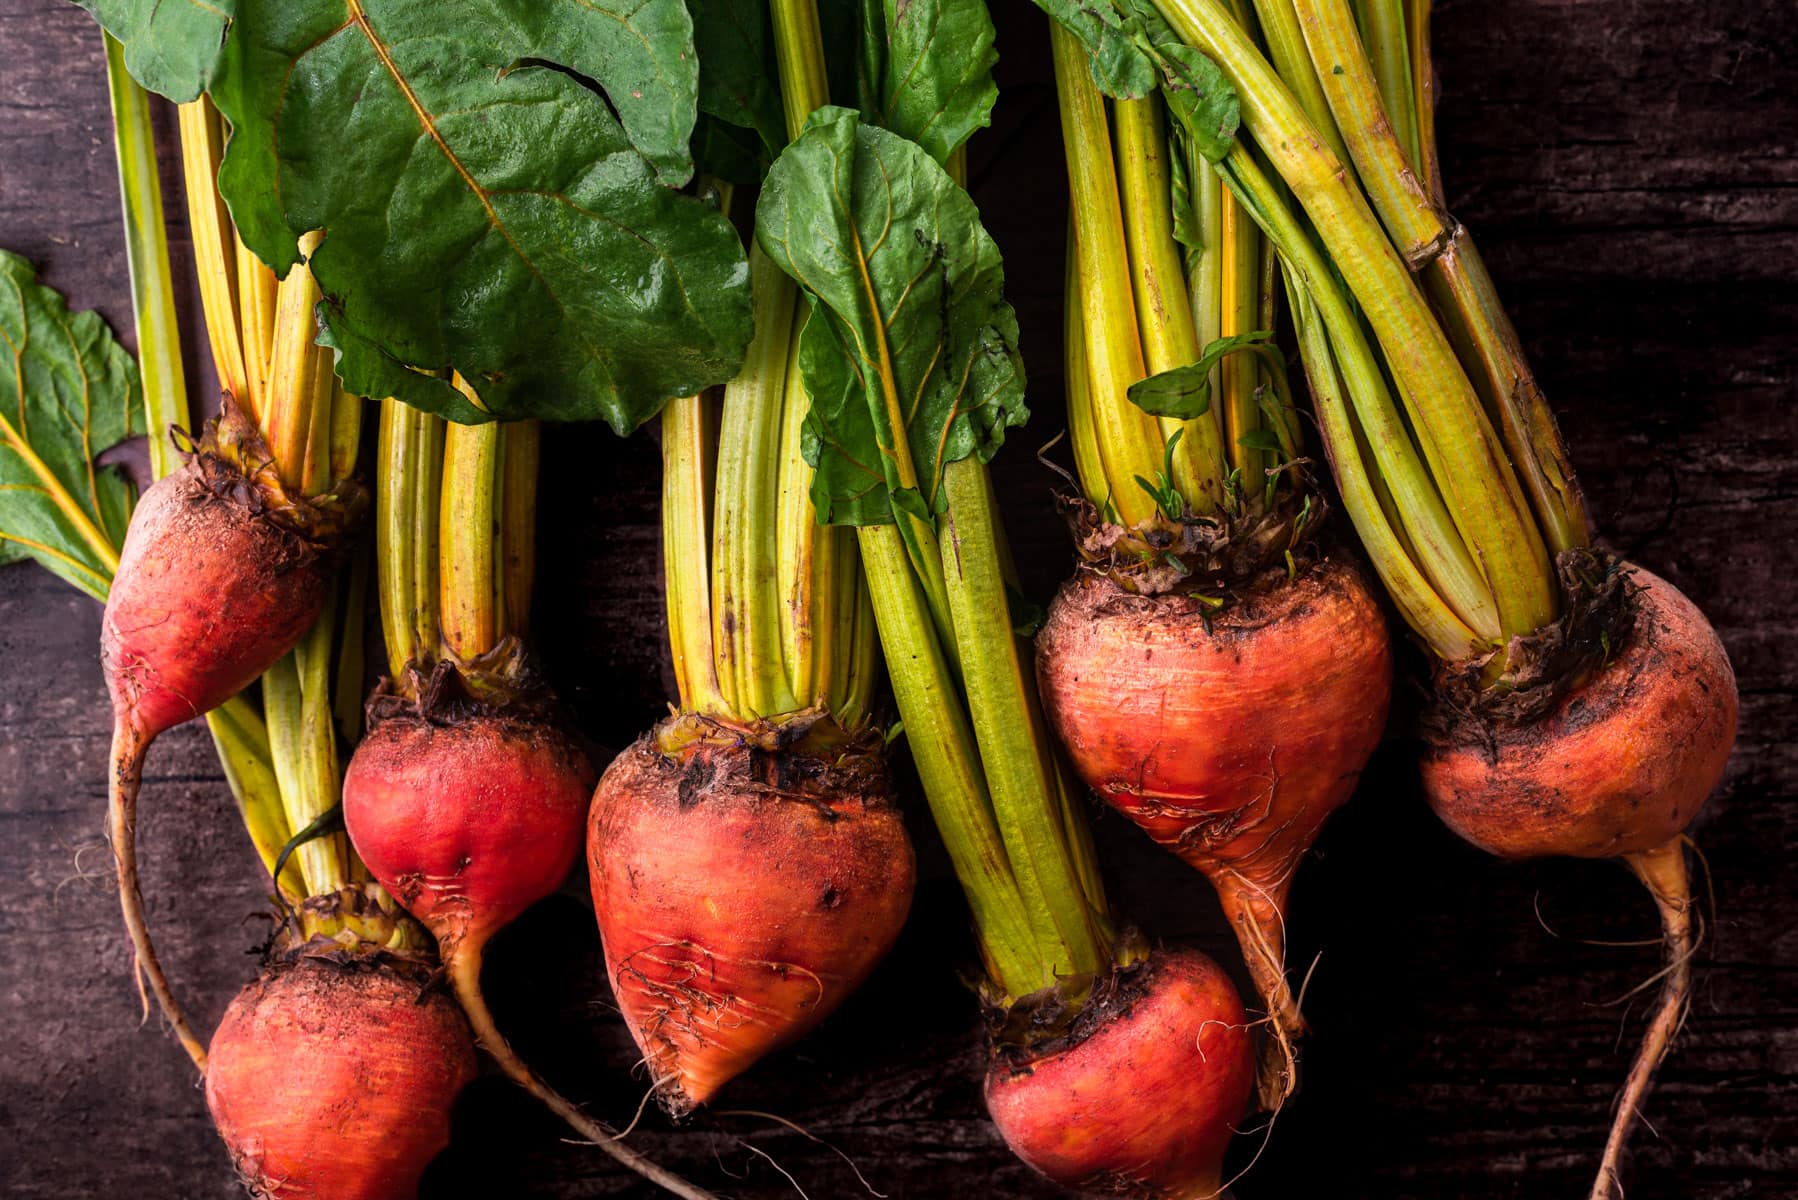 beet root with stems on wood background